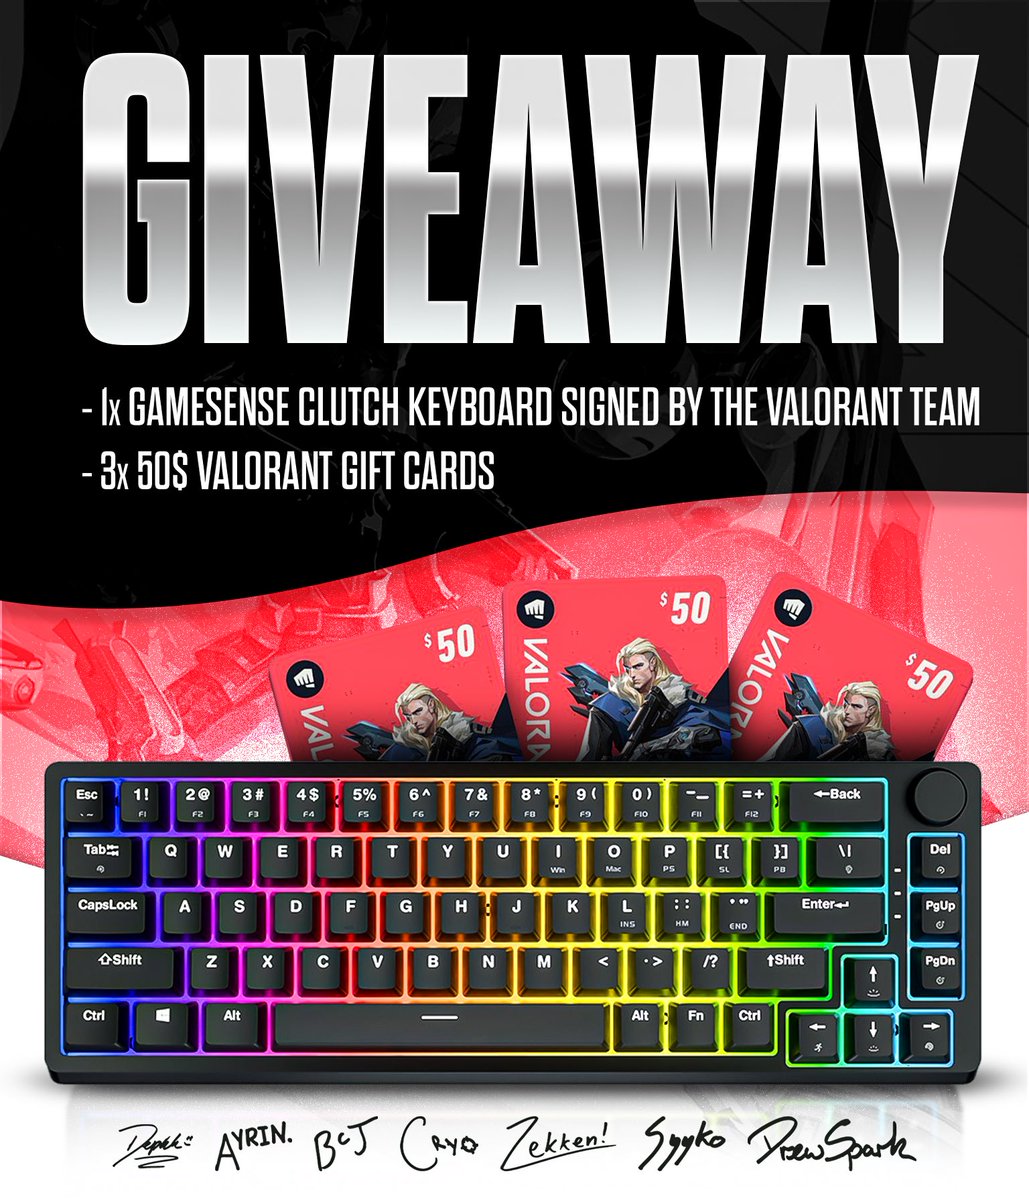 To celebrate our run in #VALORANTChampions I am giving away: - 1 @Gamesense_gg Clutch Keyboard signed by the XSET team - 3 $50 VALORANT Gift Cards To enter, follow @SyykoNT and @XSET, ❤️+♻️ this tweet, and tag 2 friends in the comments! Winner announced Sep 30, more info below.